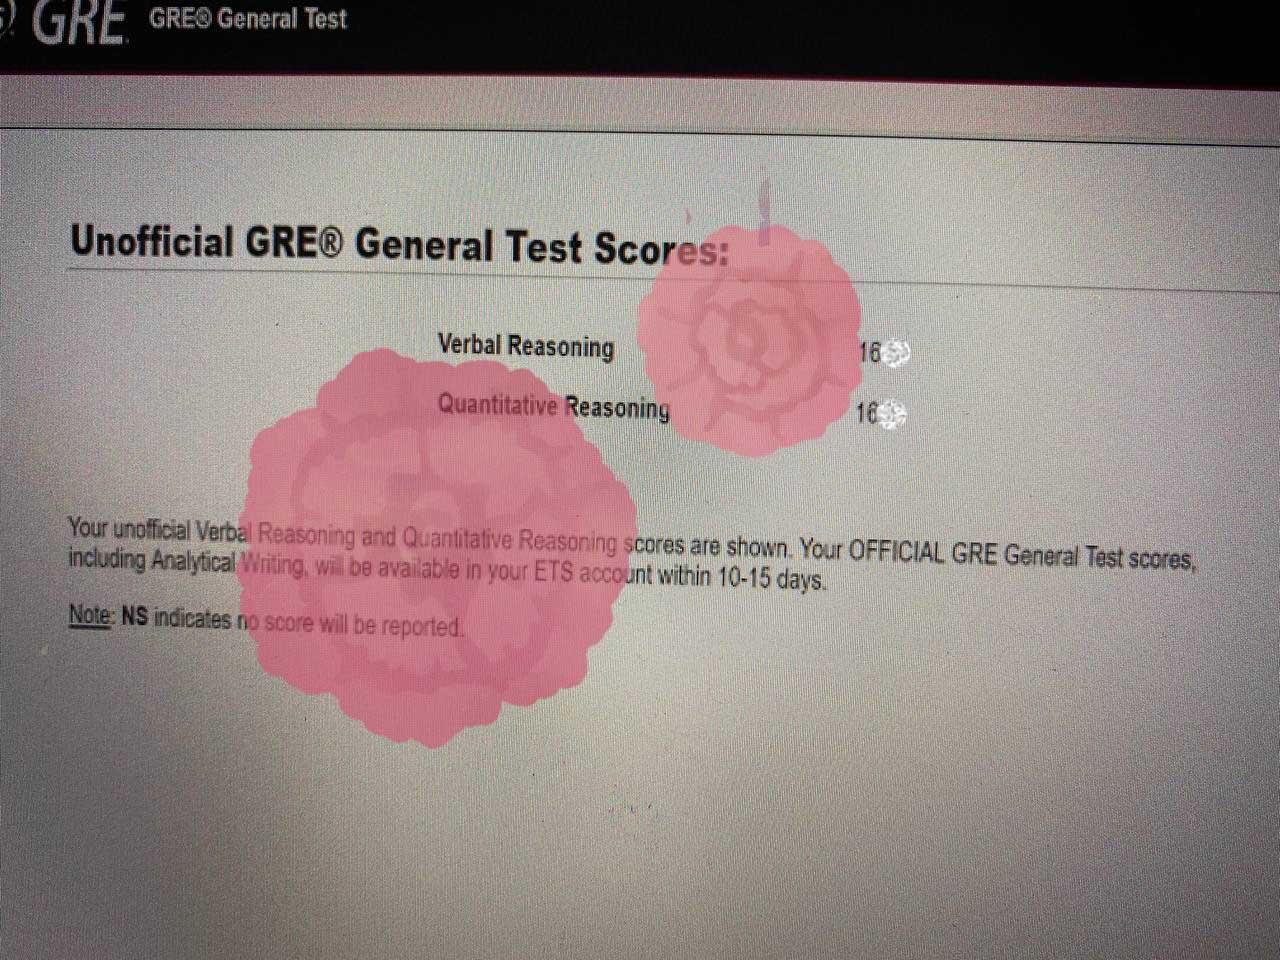 score image for GRE Cheating success story #307